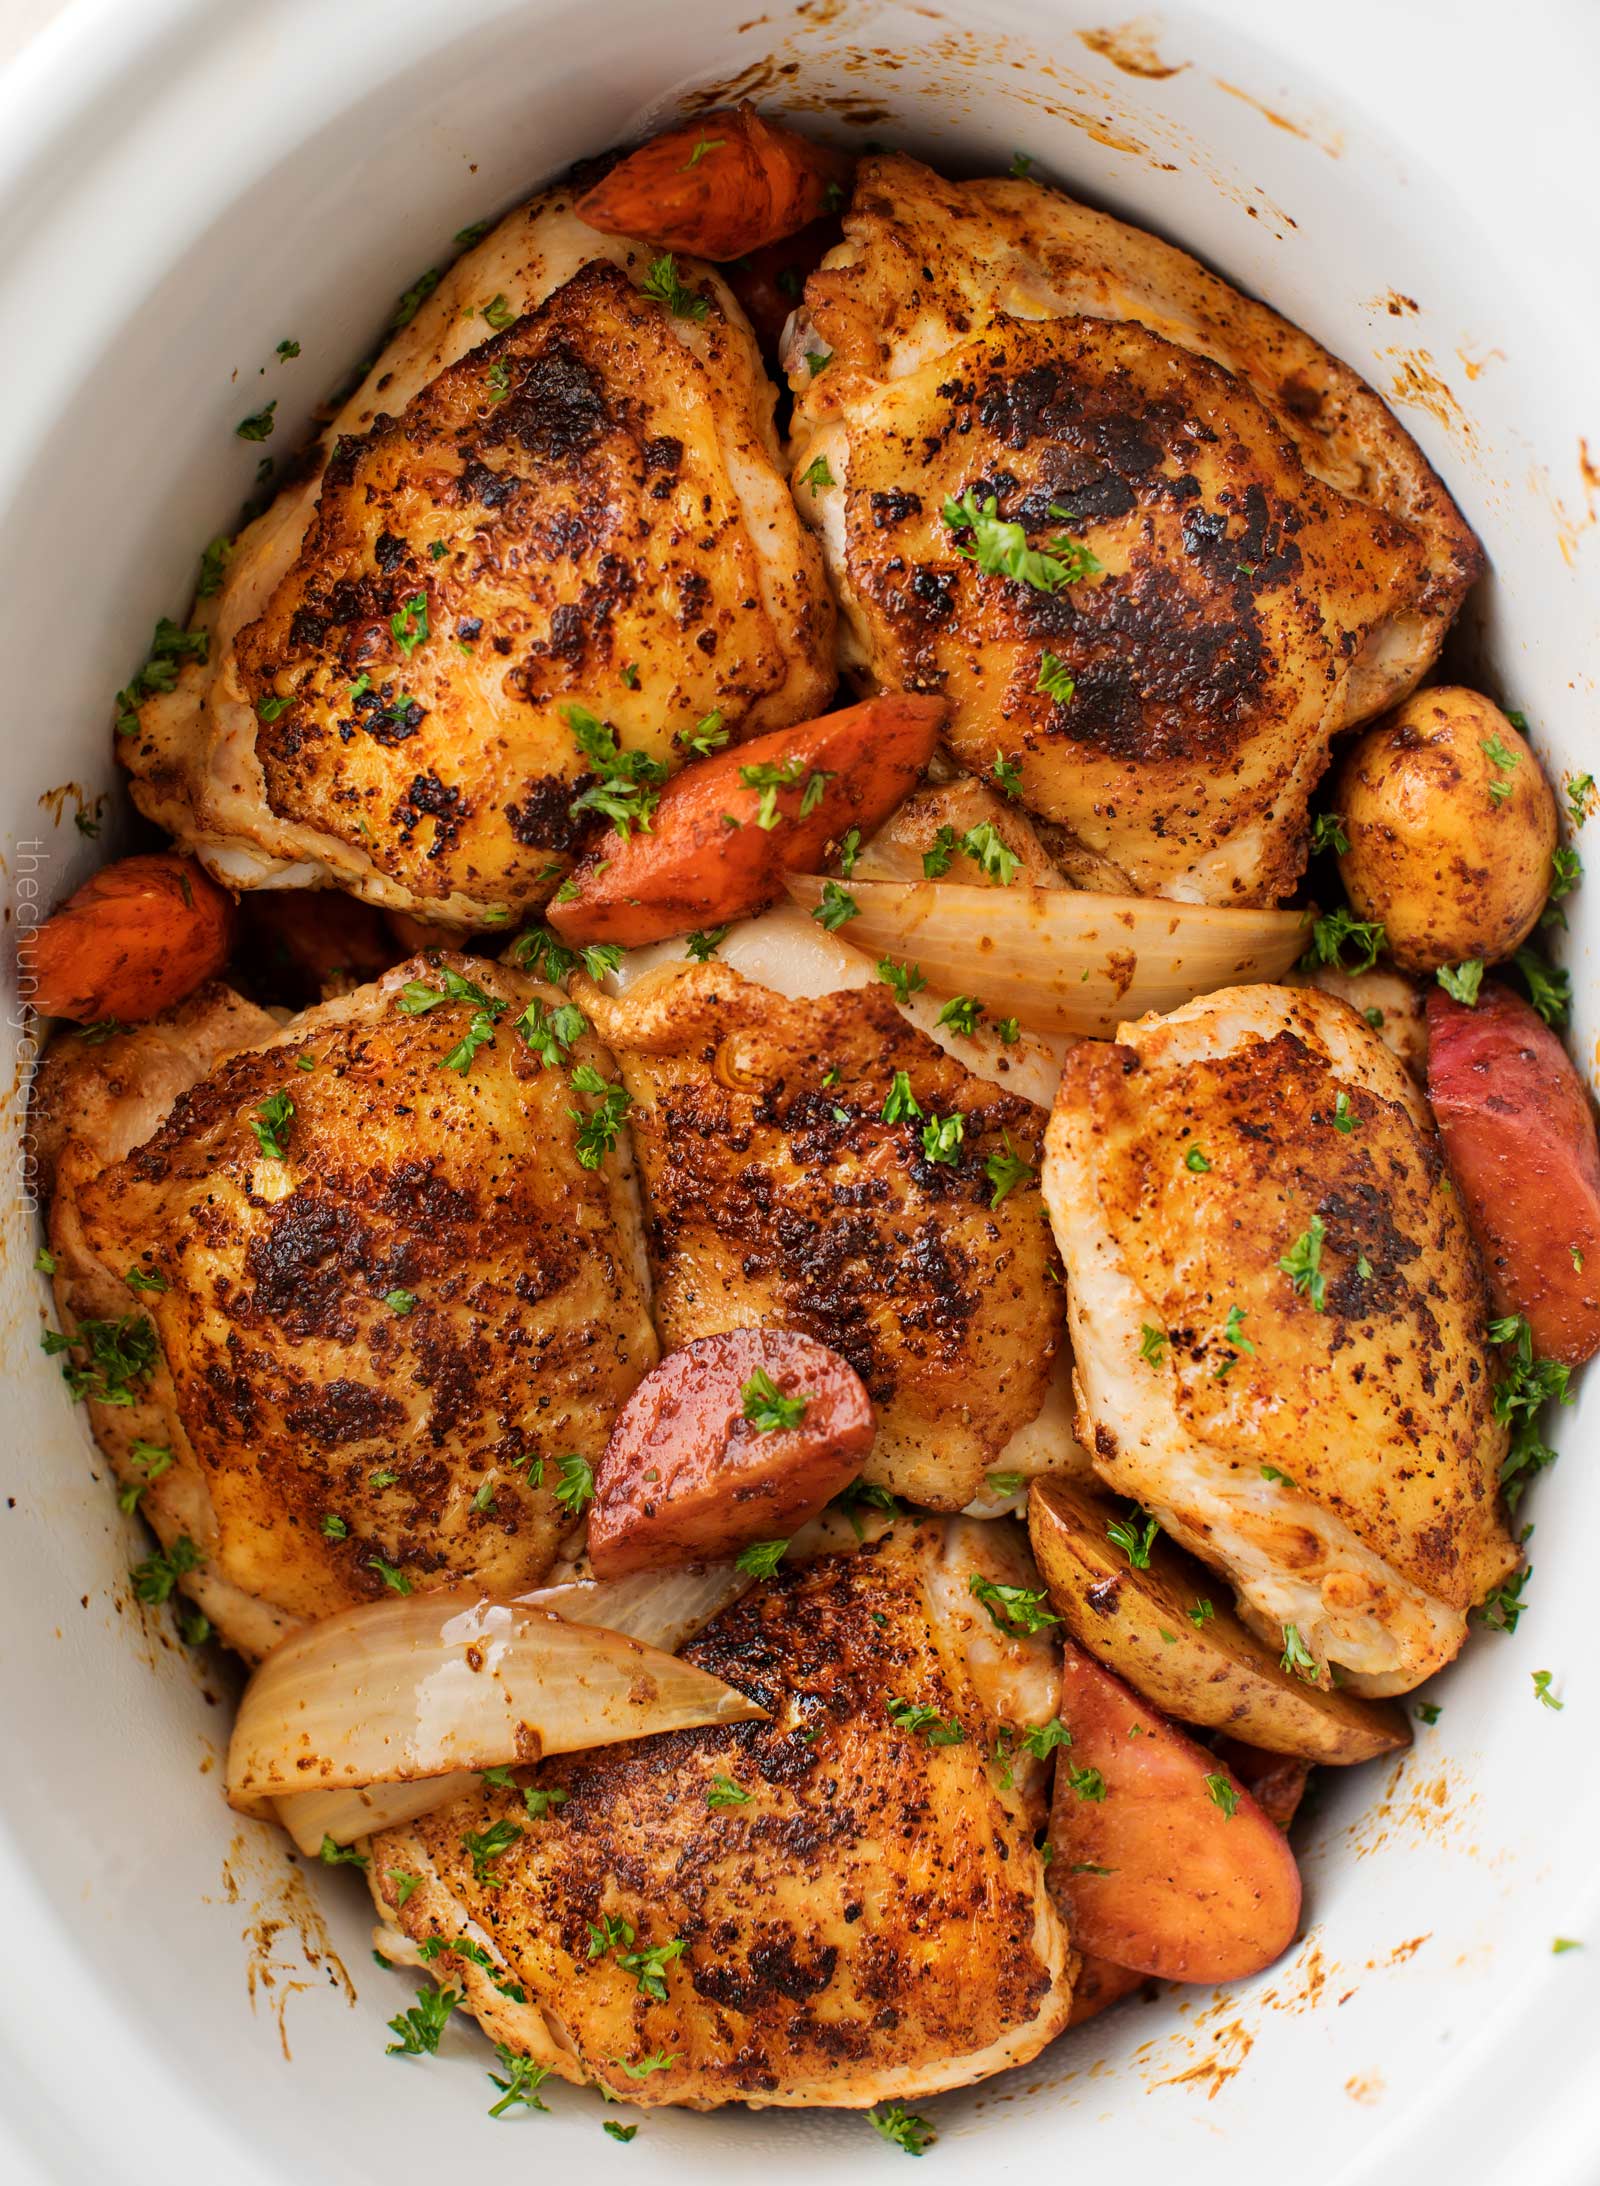 Harissa chicken and vegetables in a slow cooker